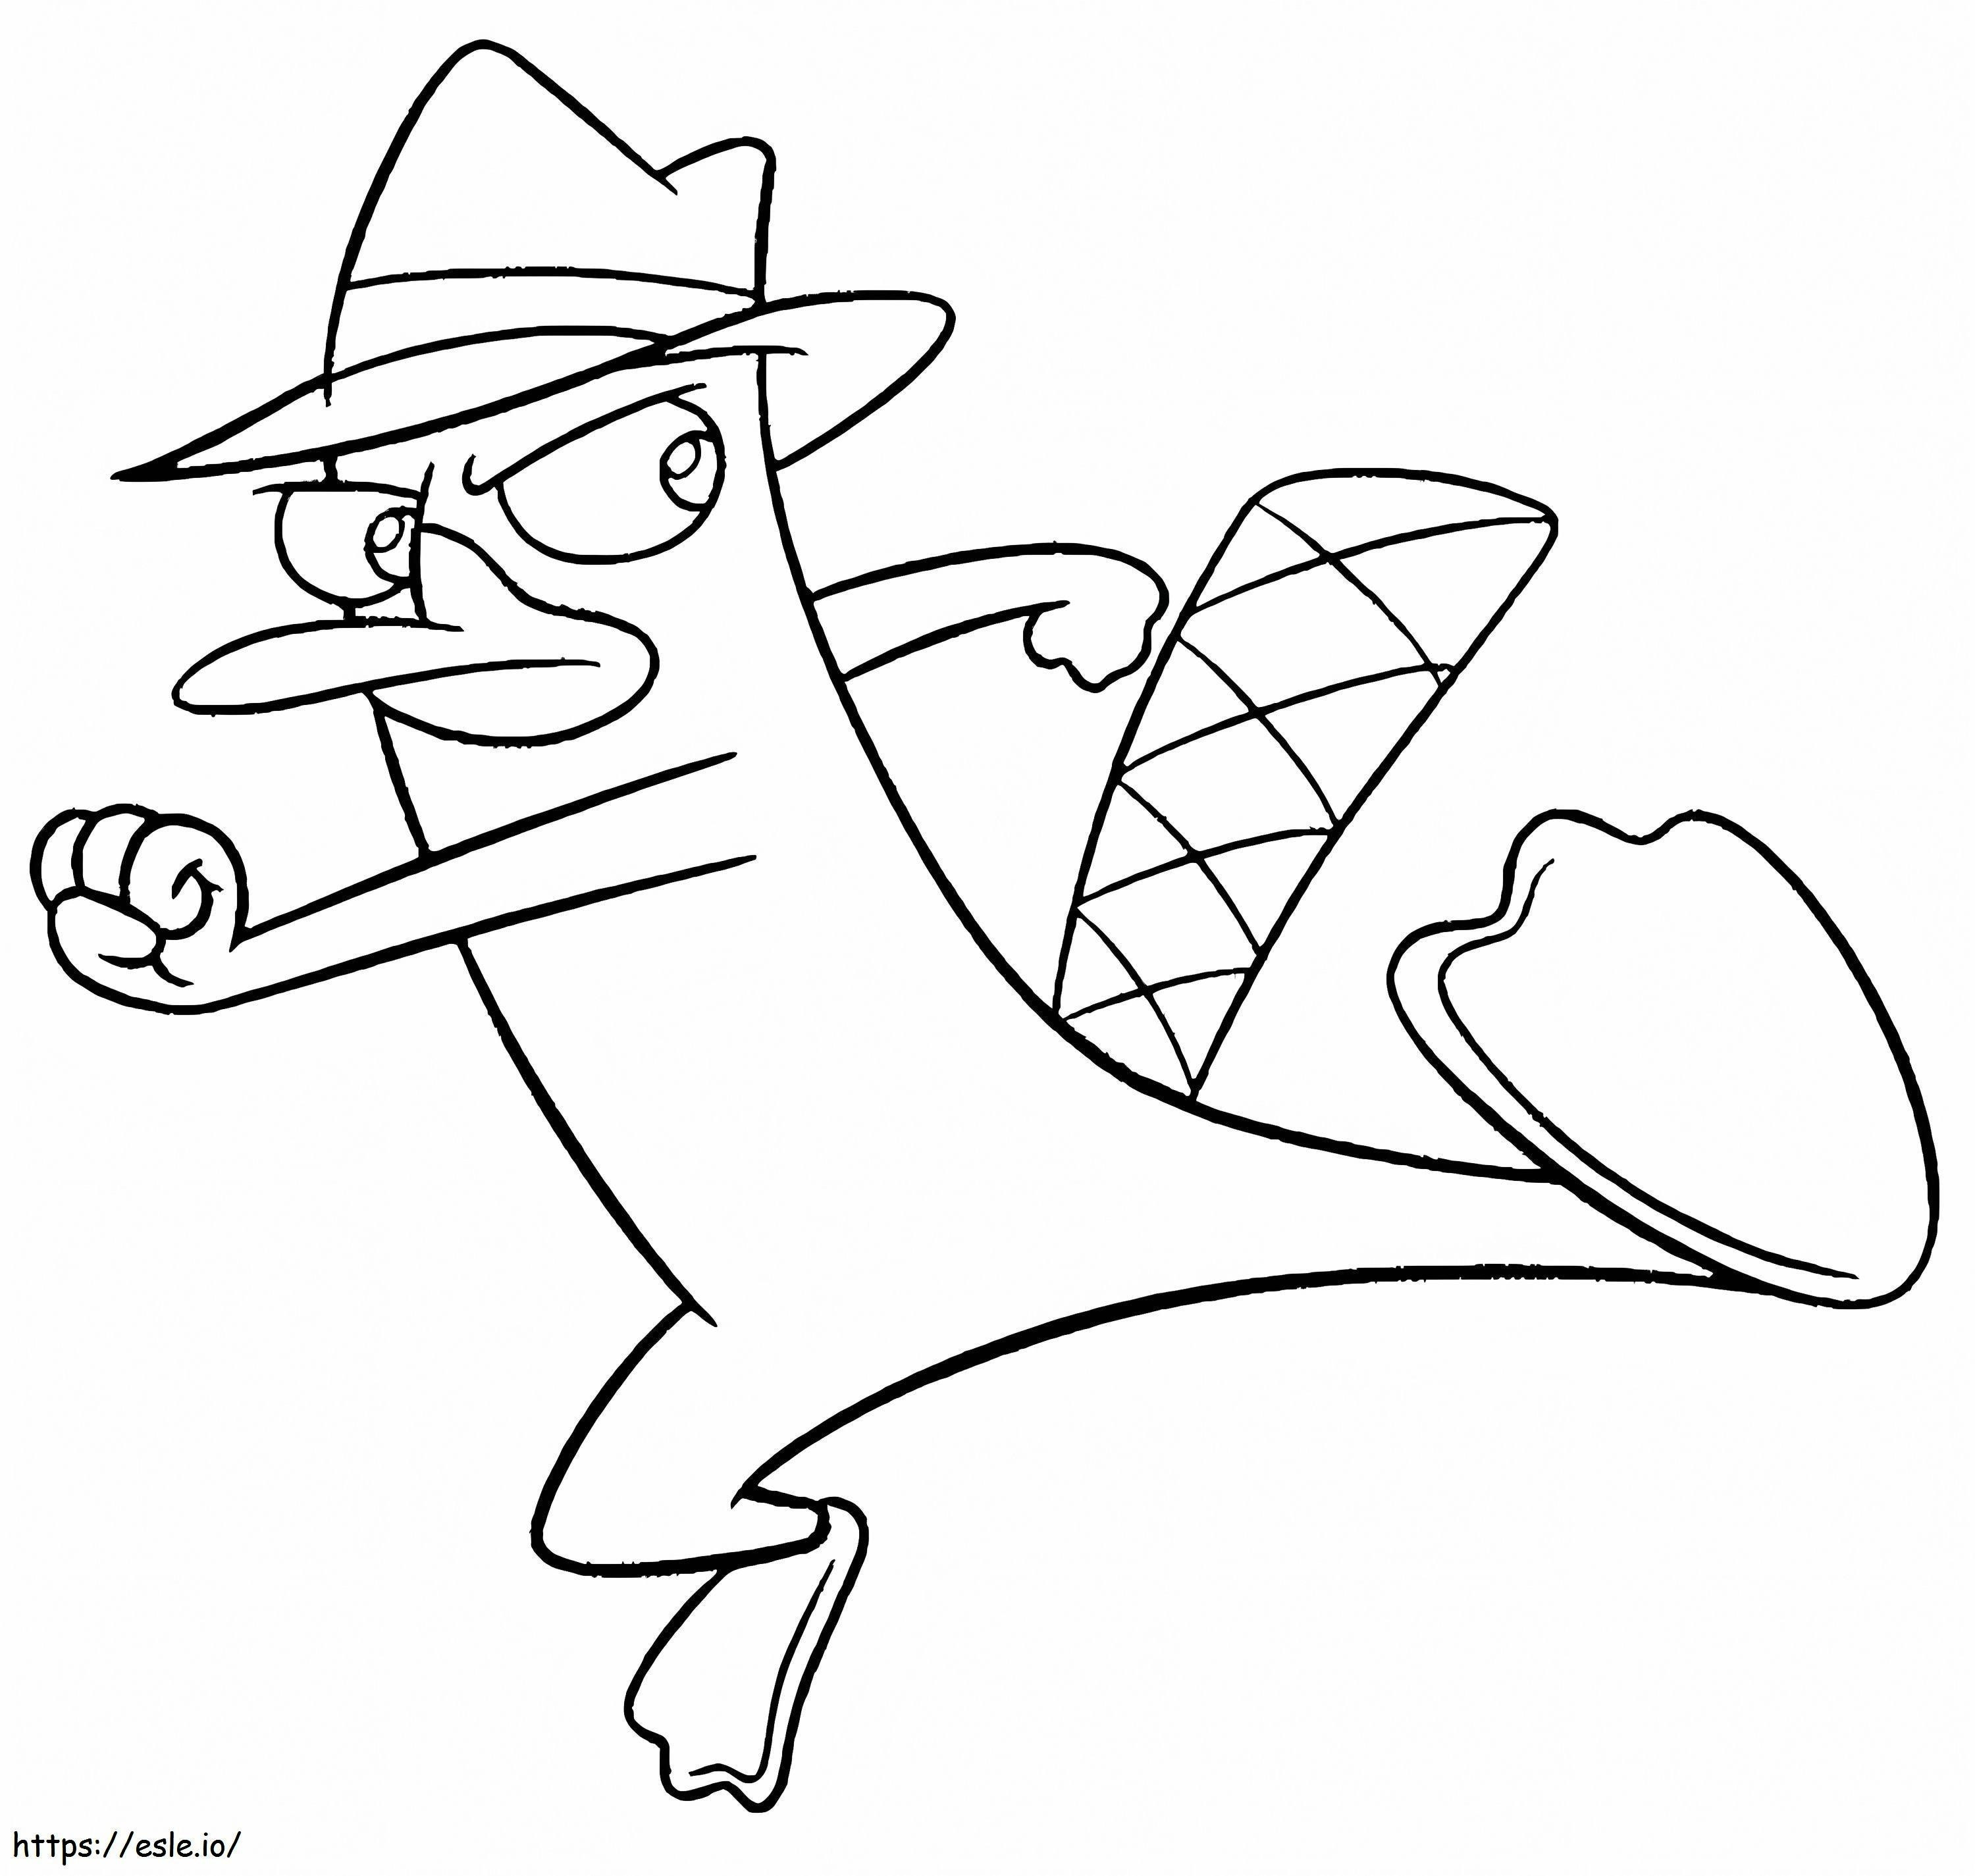 Perry Punch coloring page